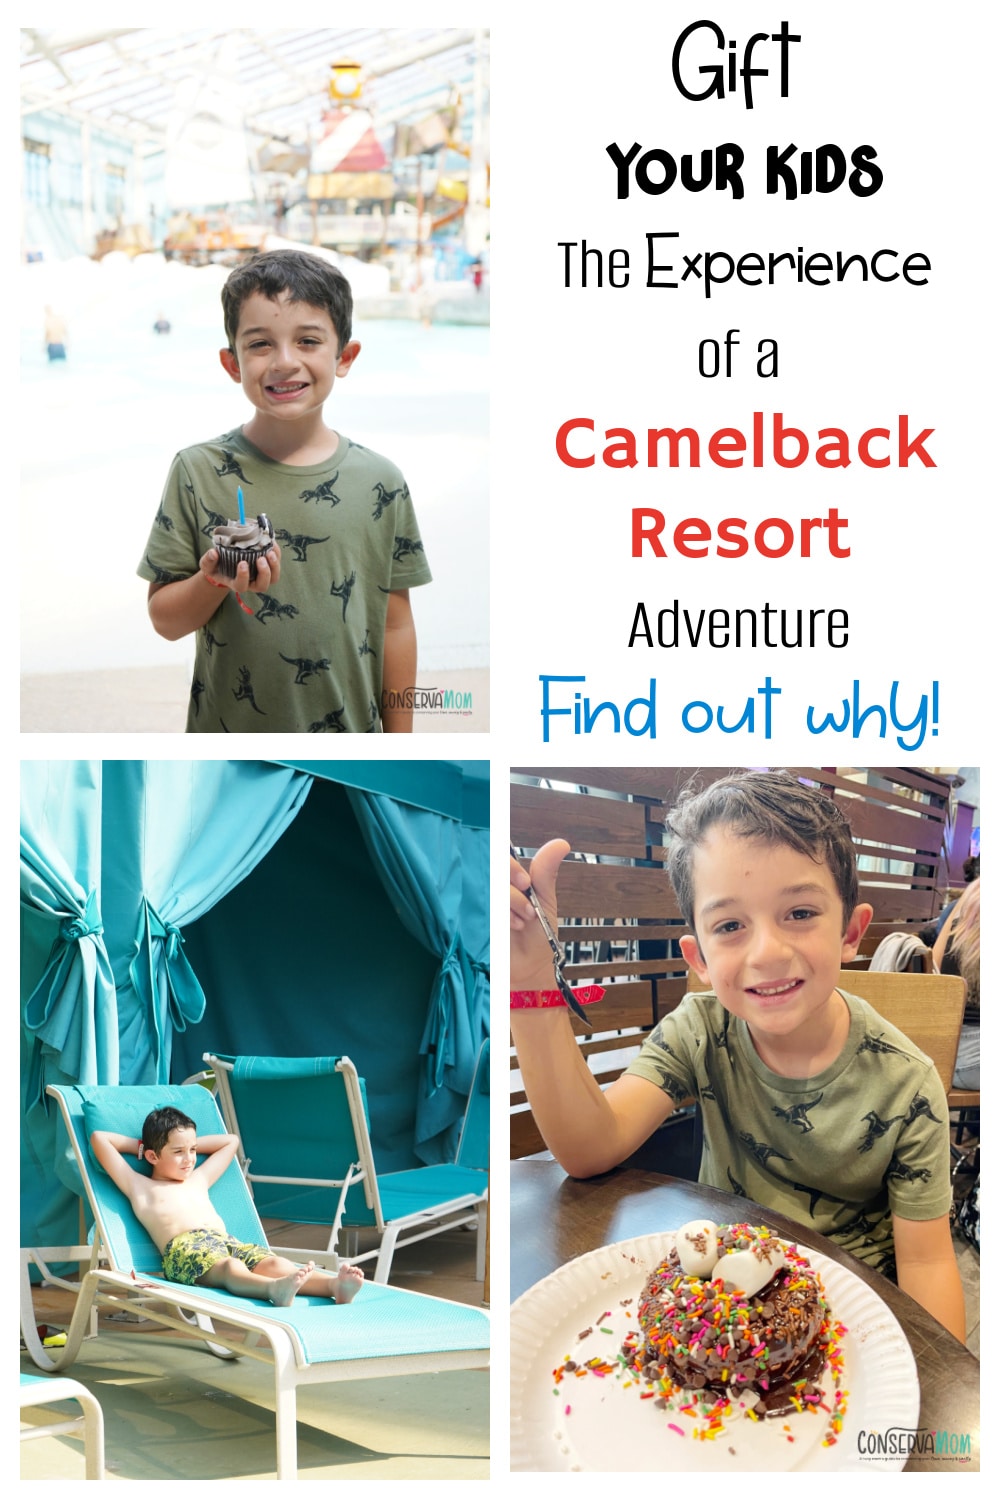 Gift Your Kids The Experience of a Camelback Resort Adventure